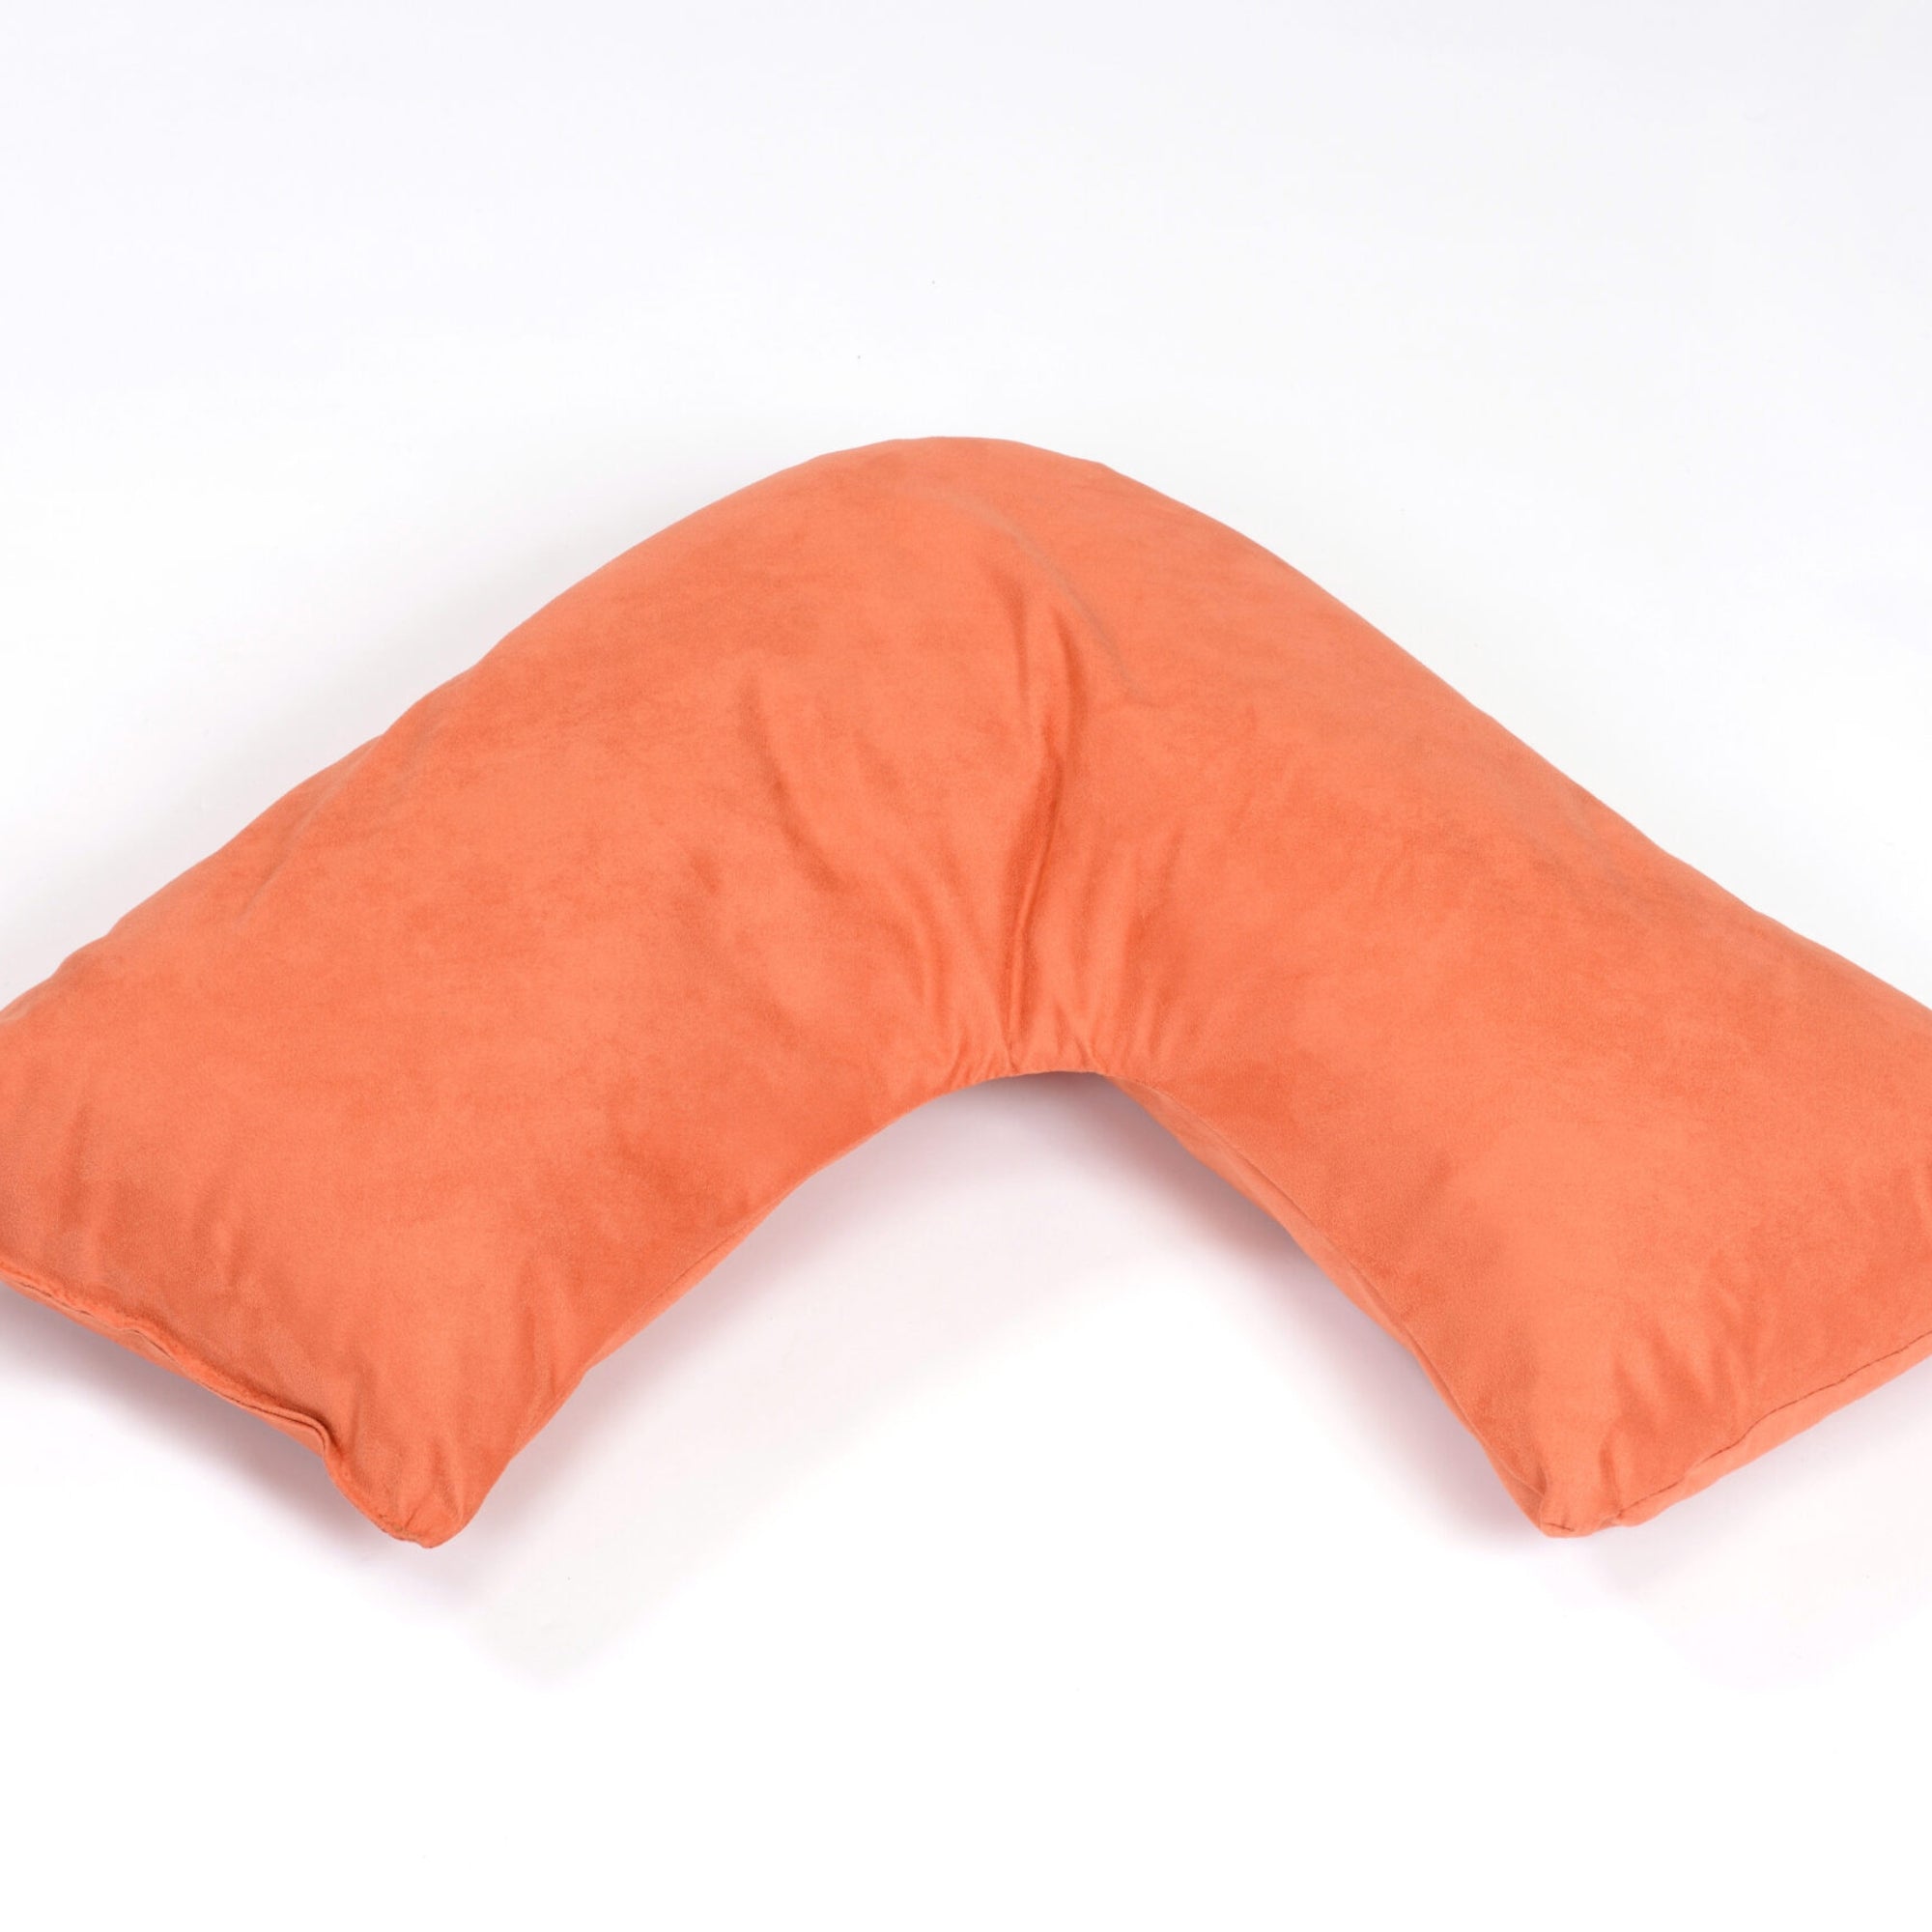 Inclu Squidgy Triangle Support, The Soft Triangle Support Cushion is a versatile and squishy addition to any living space, designed to provide excellent back support in various settings. Whether used on its own or with other furniture, this cushion ensures comfort and relaxation. Here are some of its key features: Multi-Functional Design: This cushion's soft triangle shape allows it to be used in numerous ways. It's perfect for providing excellent back support, whether you're sitting on the floor, a chair, 